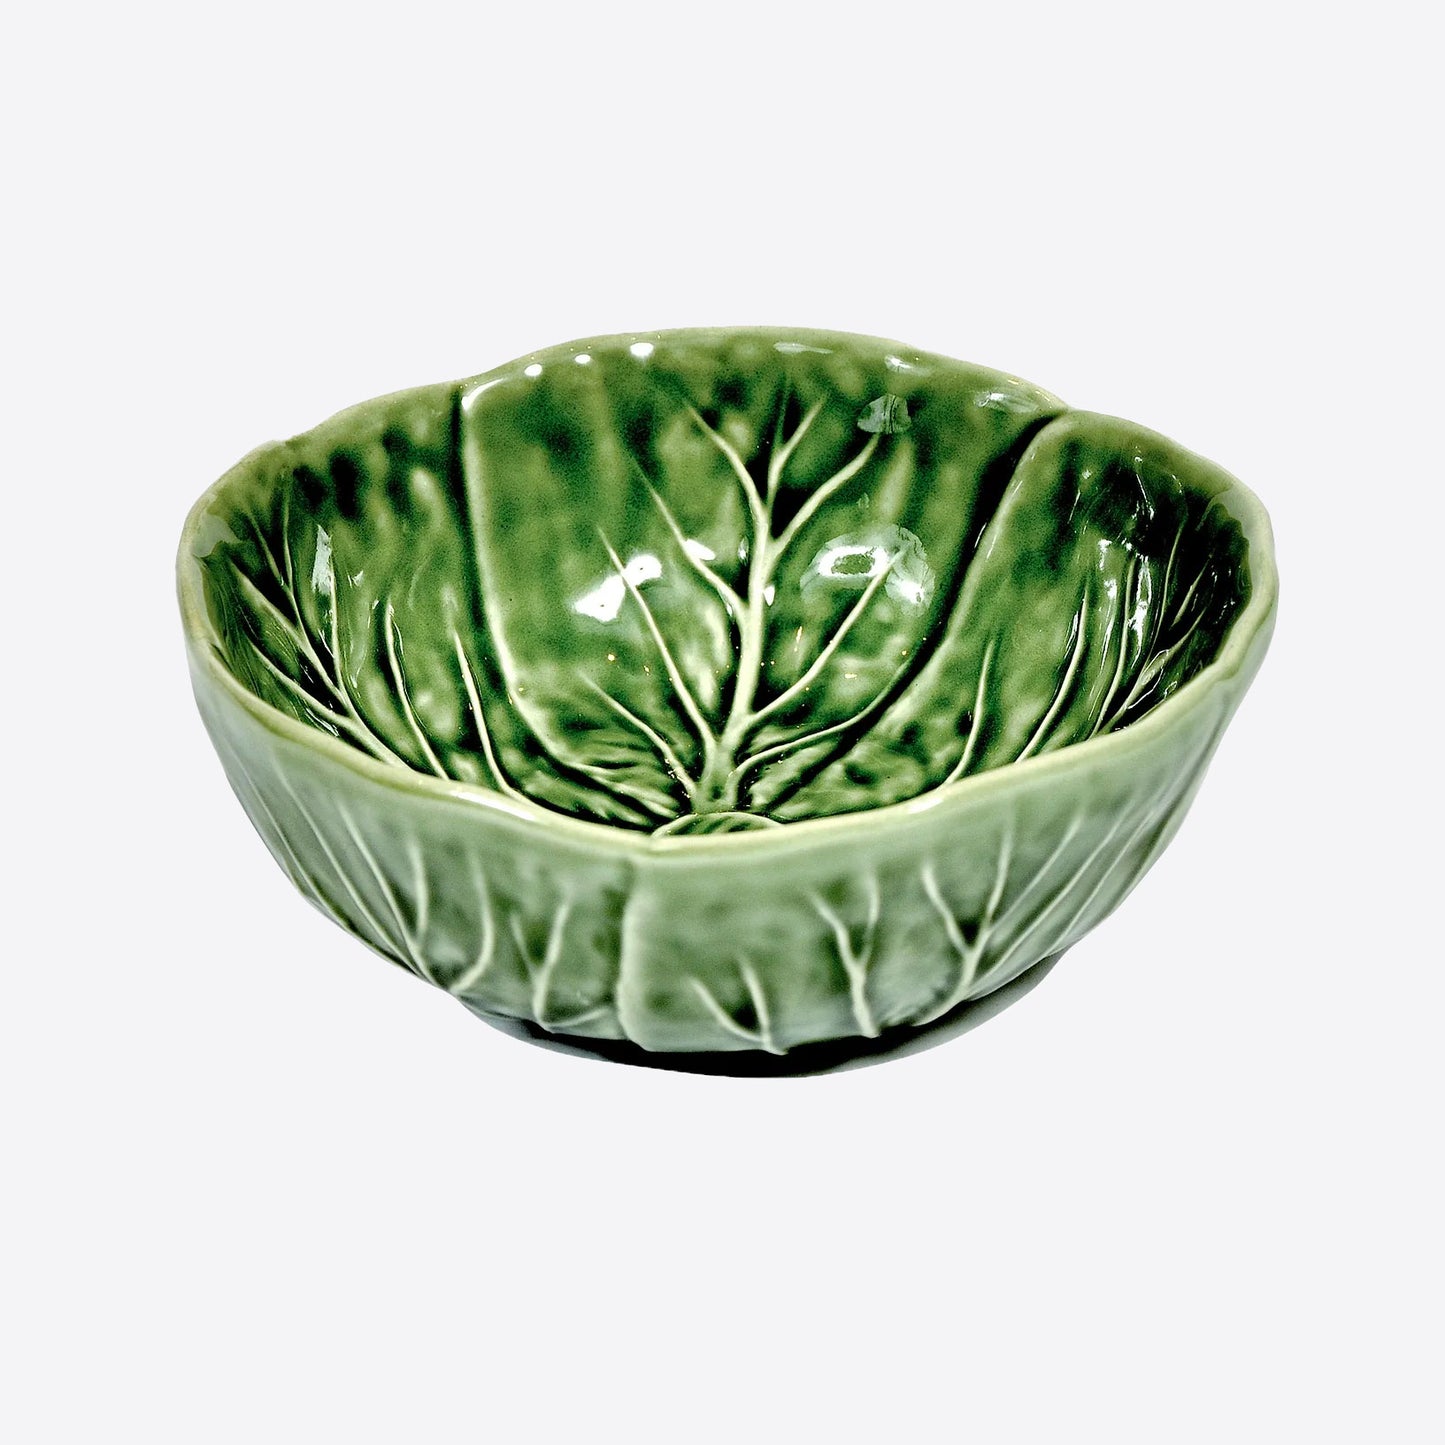 Green cabbage bowl